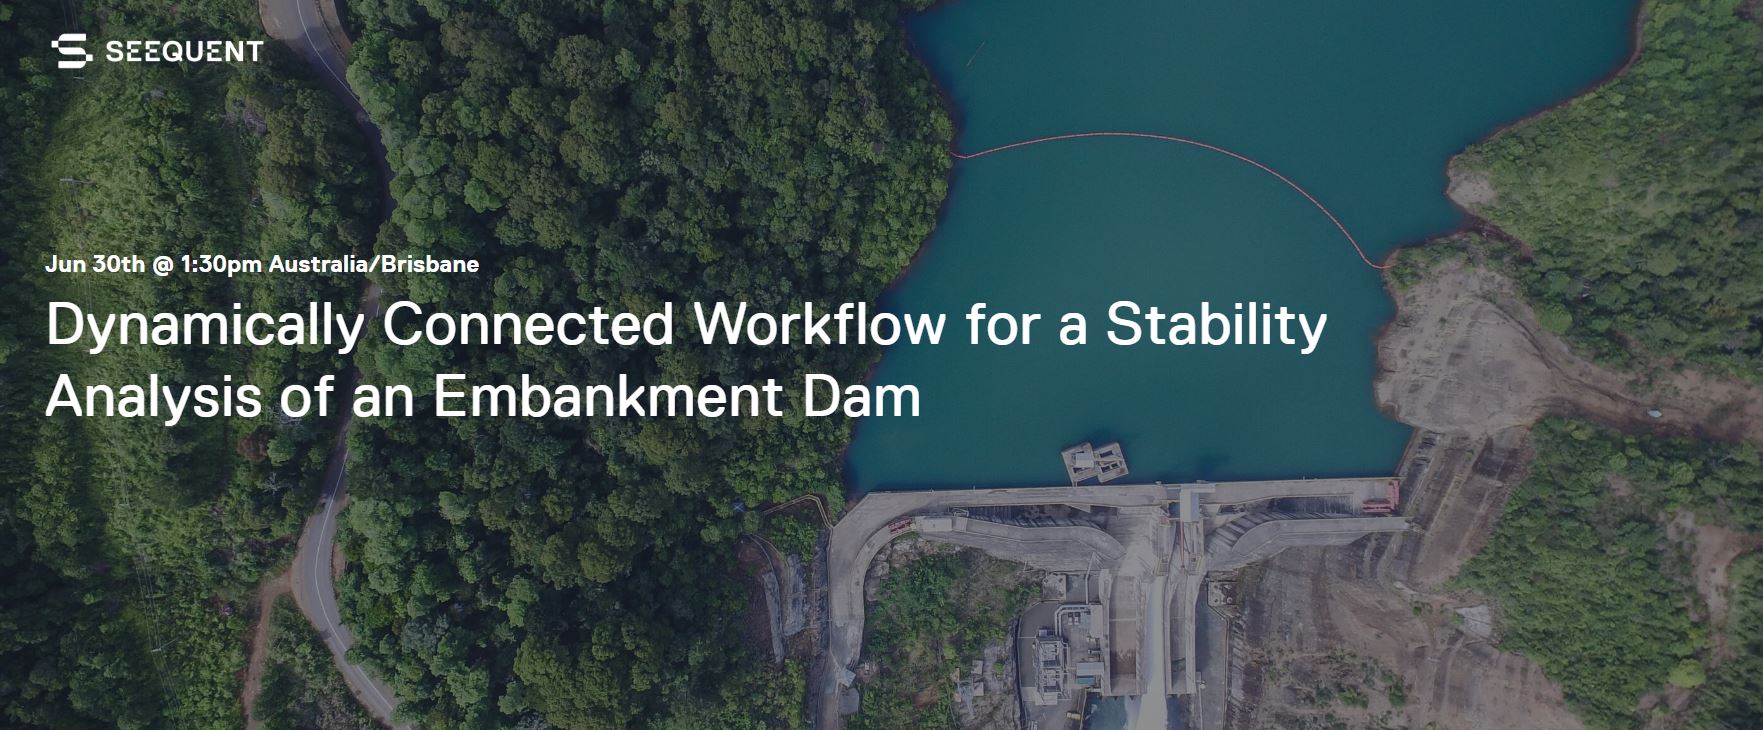 Dynamically Connected Workflow for a Stability Analysis of an Embankment Dam